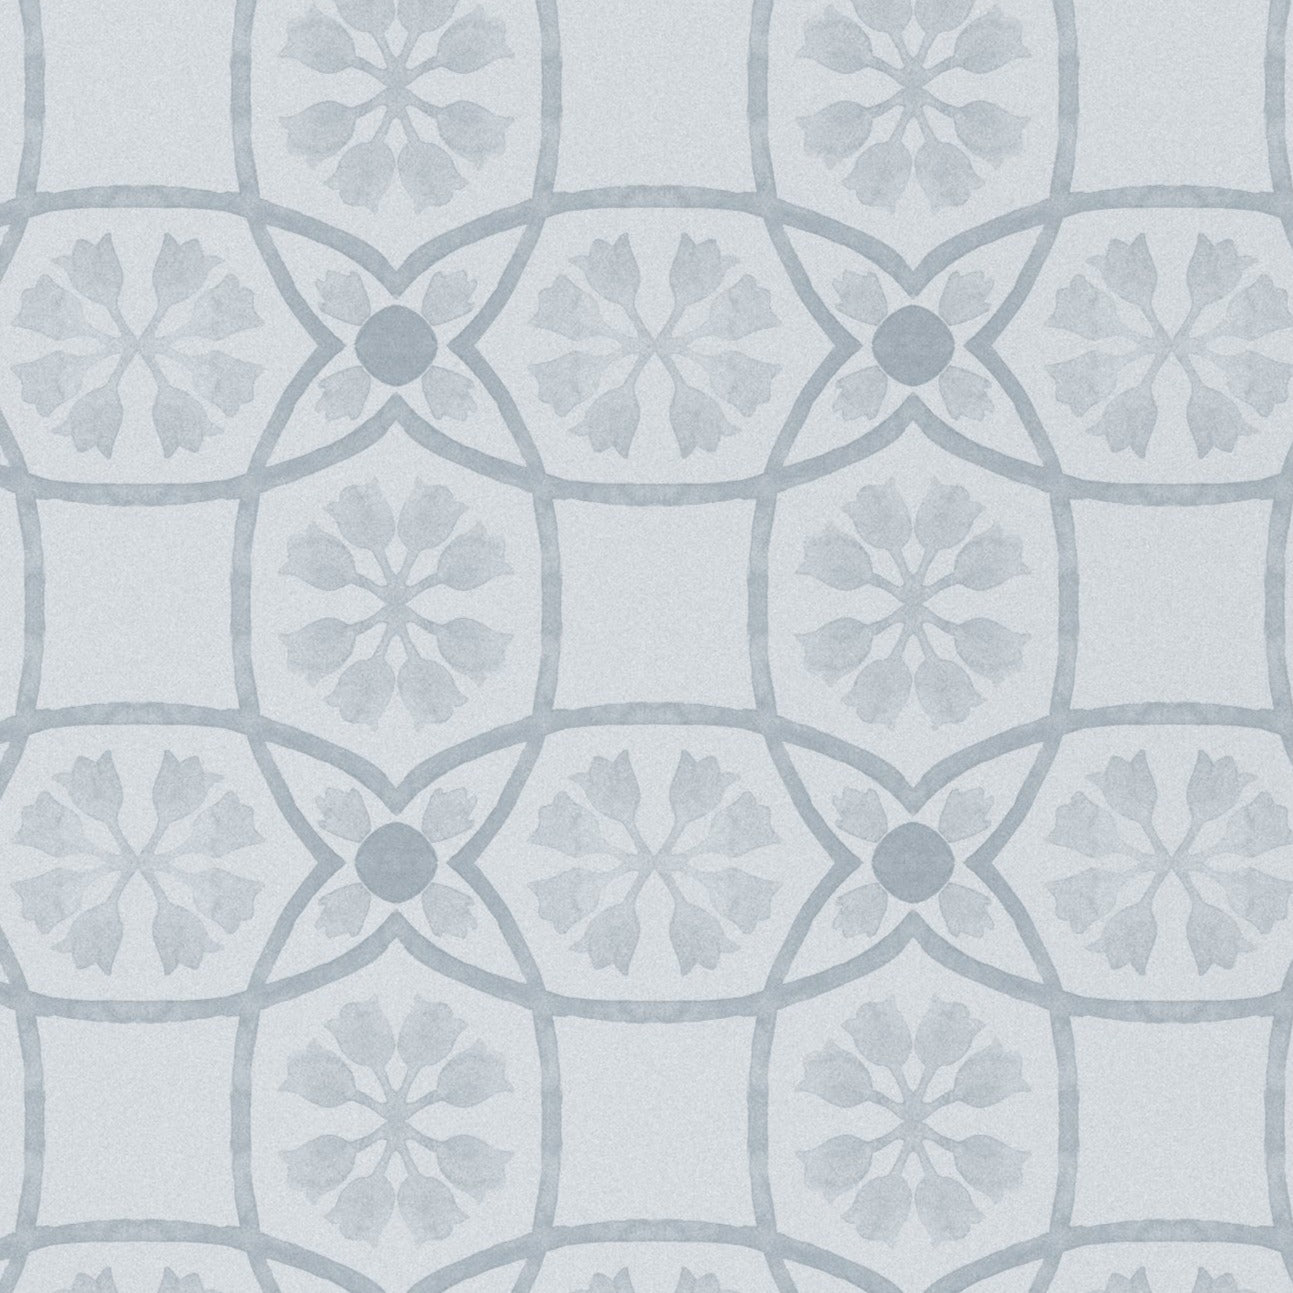 A detailed image of the 'Distressed Moroccan Tile - Pale Blue' wallpaper pattern, depicting a harmonious geometric floral design. The soft pale blue and distressed texture give the wallpaper a vintage charm and a soothing color scheme, ideal for adding a touch of elegance to any room.